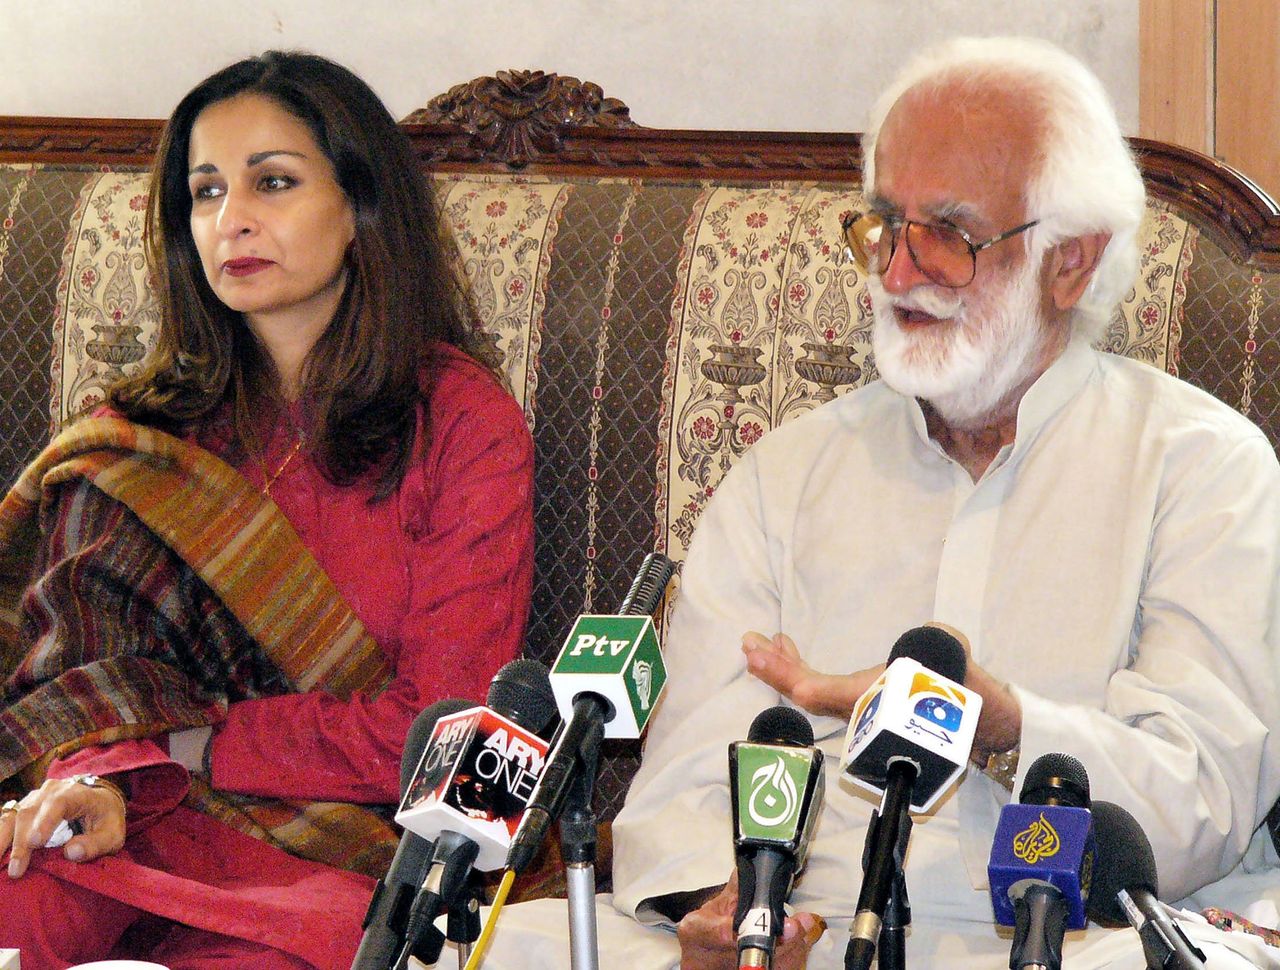 Baloch leader Akbar Bugti (right) spent years in mainstream Pakistani politics before being killed by government forces in an incident later called an accident.